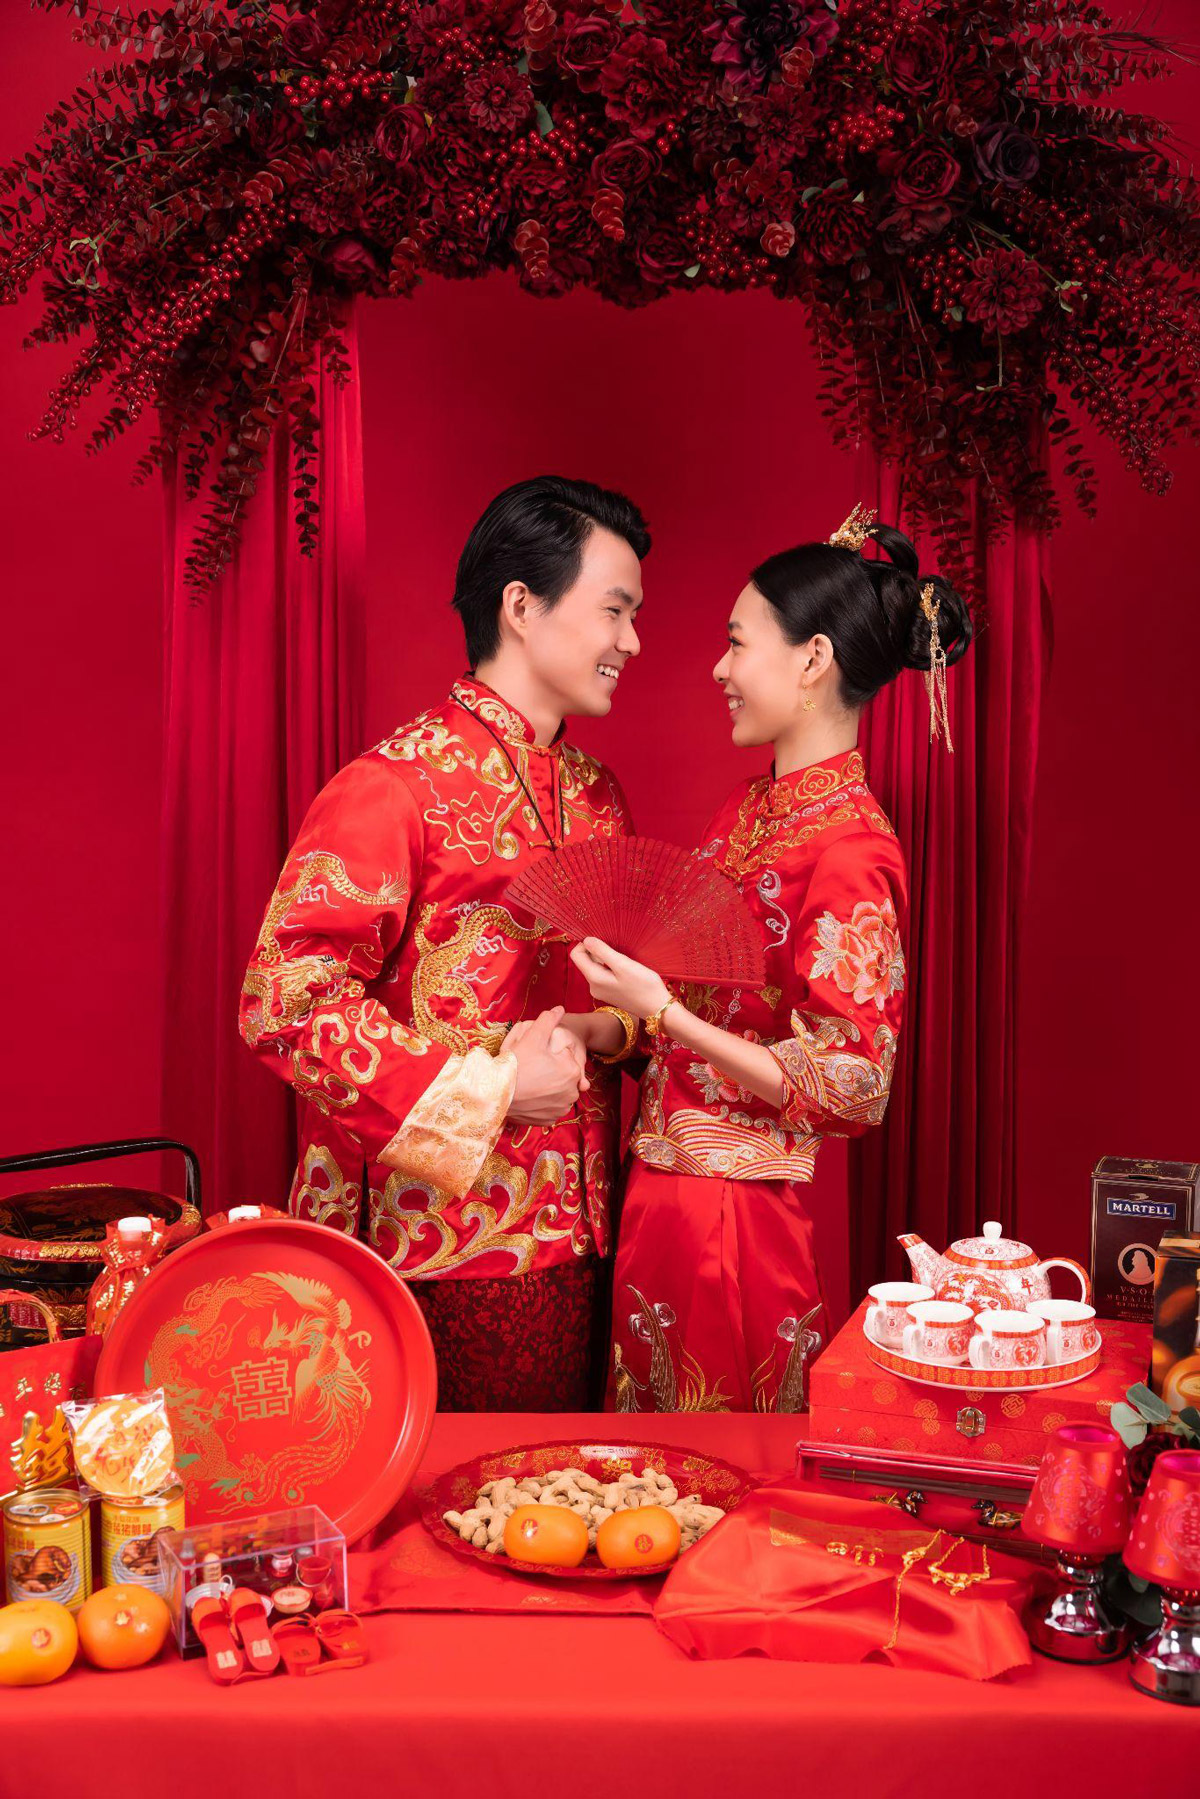 The Chinese Wedding Shop: A Traditional Wedding For the Modern Bride